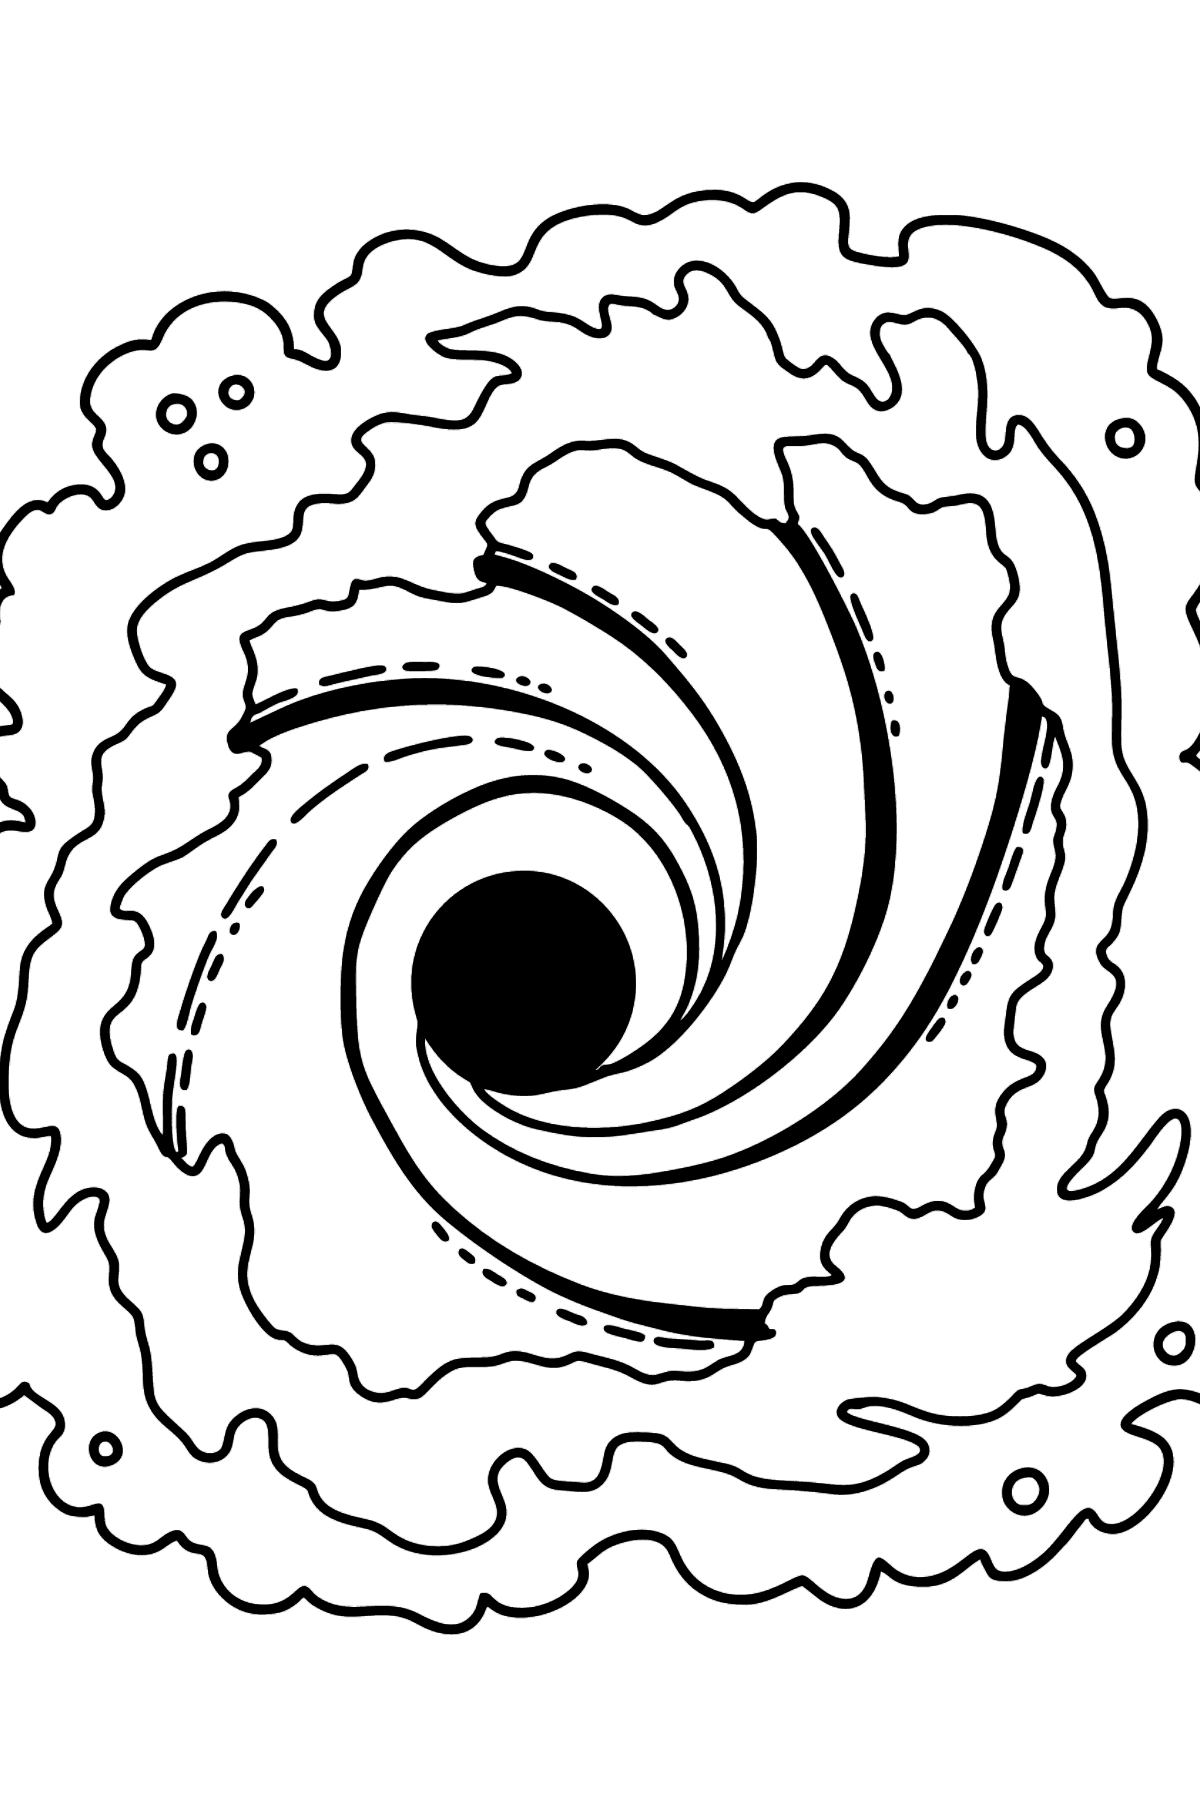 Black Hole coloring page - Coloring Pages for Kids